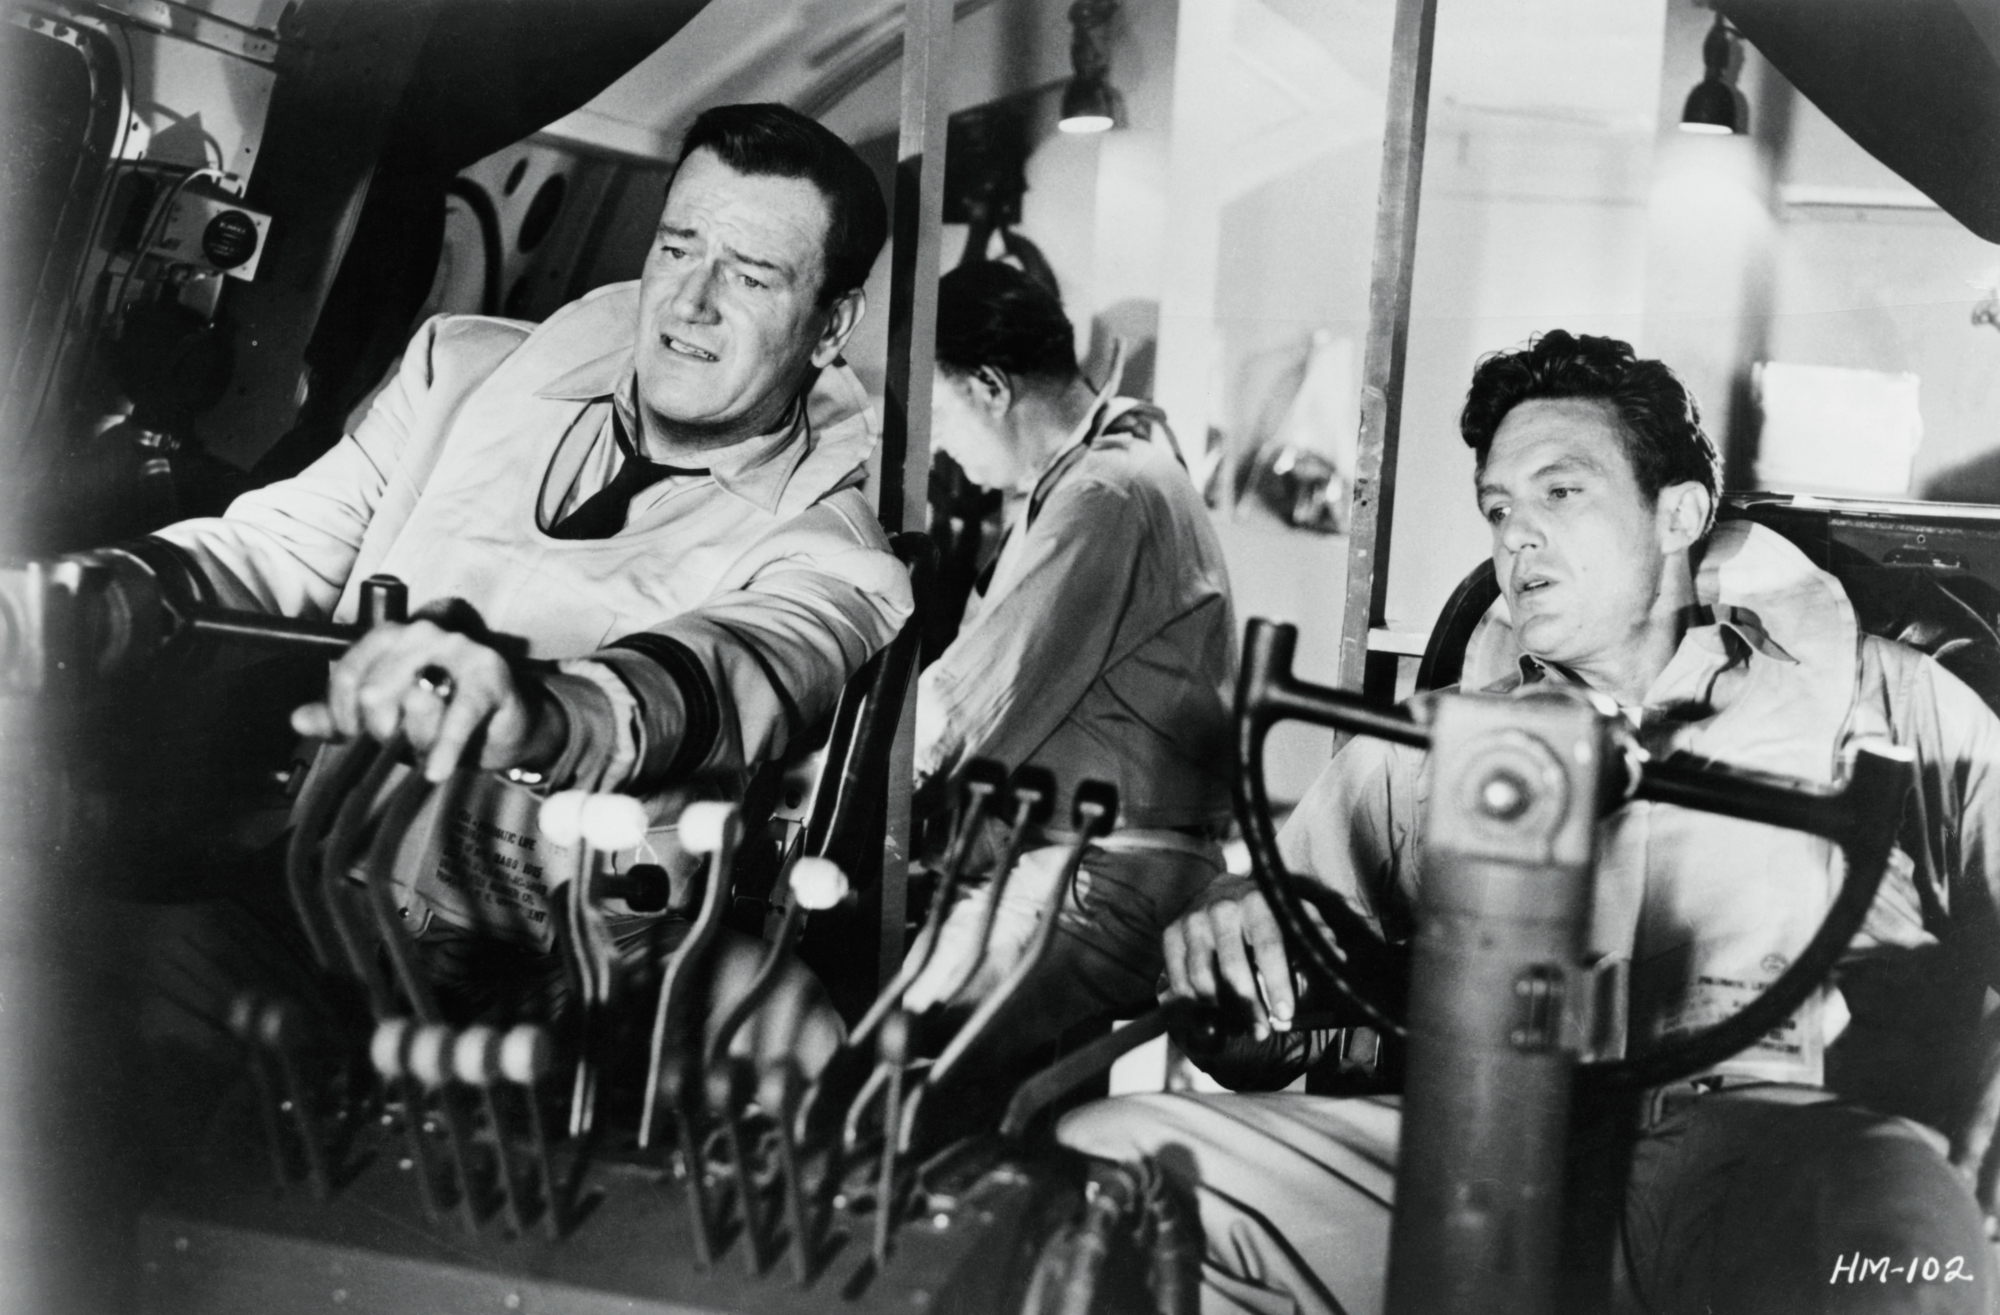 'The High and the Mighty' John Wayne as Dan Roman and Robert Stack as John Sullivan in movie roles. Black-and-white picture showing them sitting at the controls.